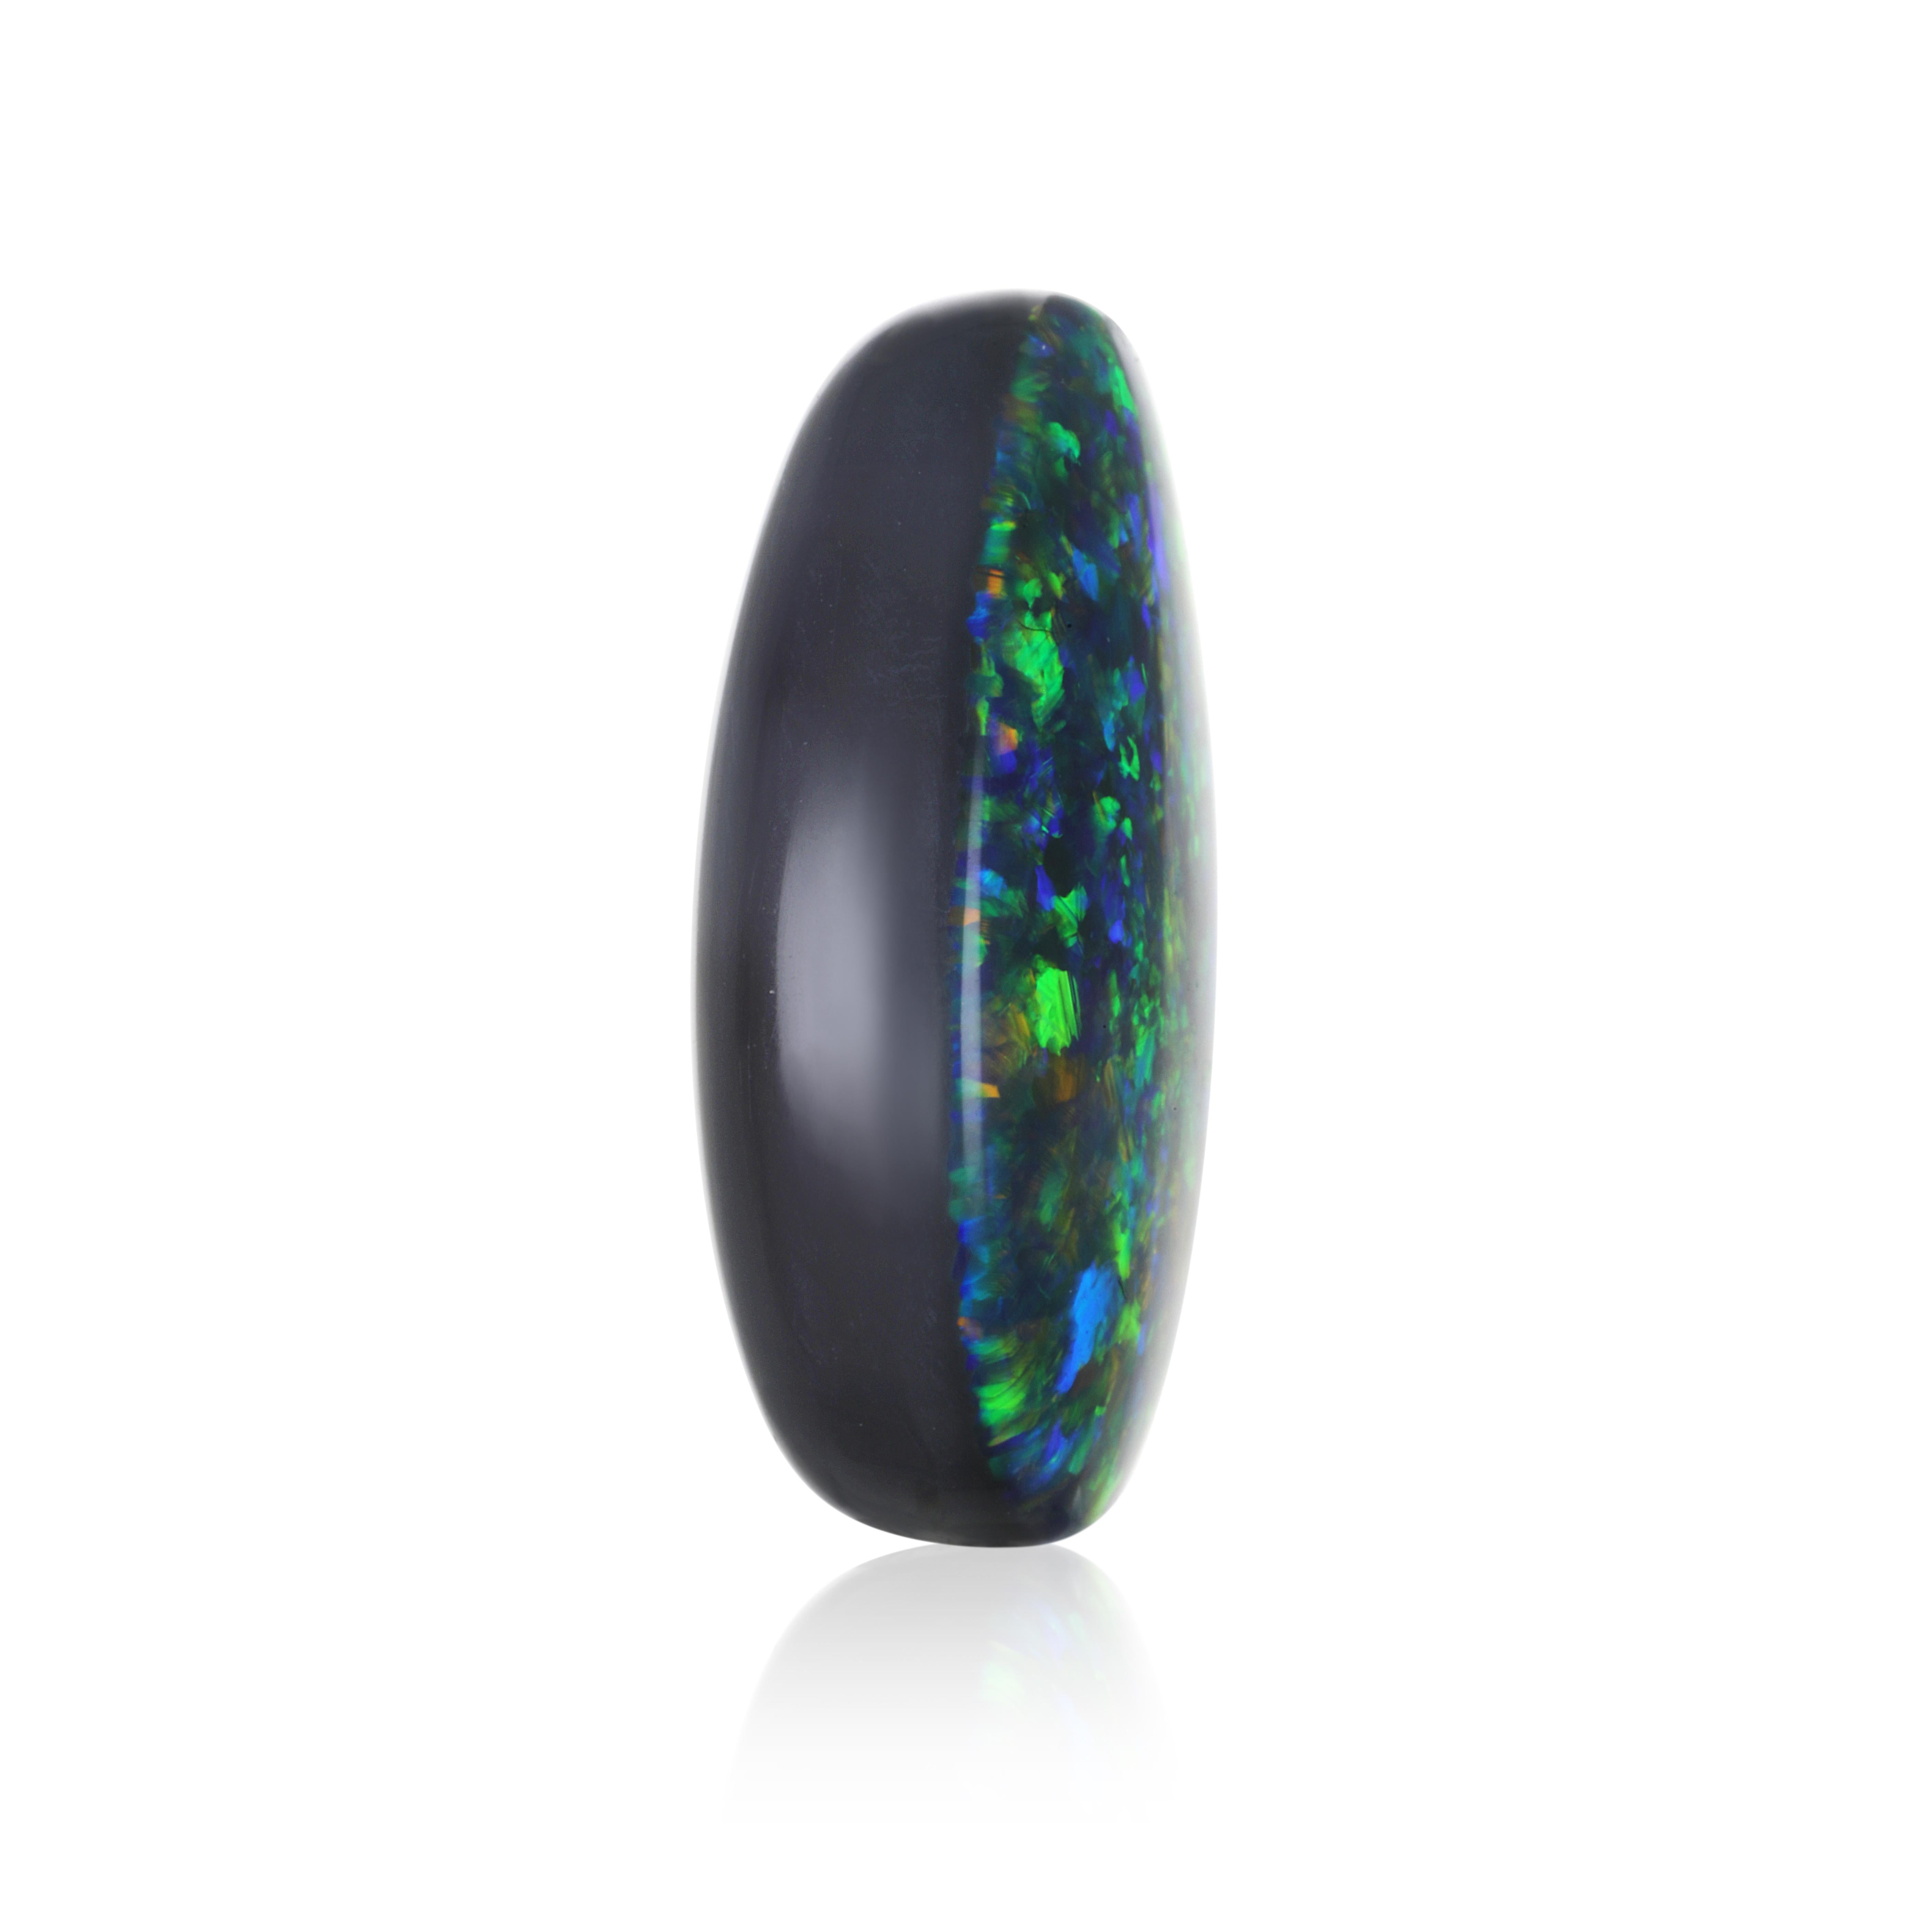 Black Opal from Lightning Ridge, Australia is one of the rarest gemstones on earth.
Spectacular in size, color, shape and exhibiting a full rainbow of colors, this 20.54-carat oval Black Opal is a gem-quality stone for the avid collector or jewelry